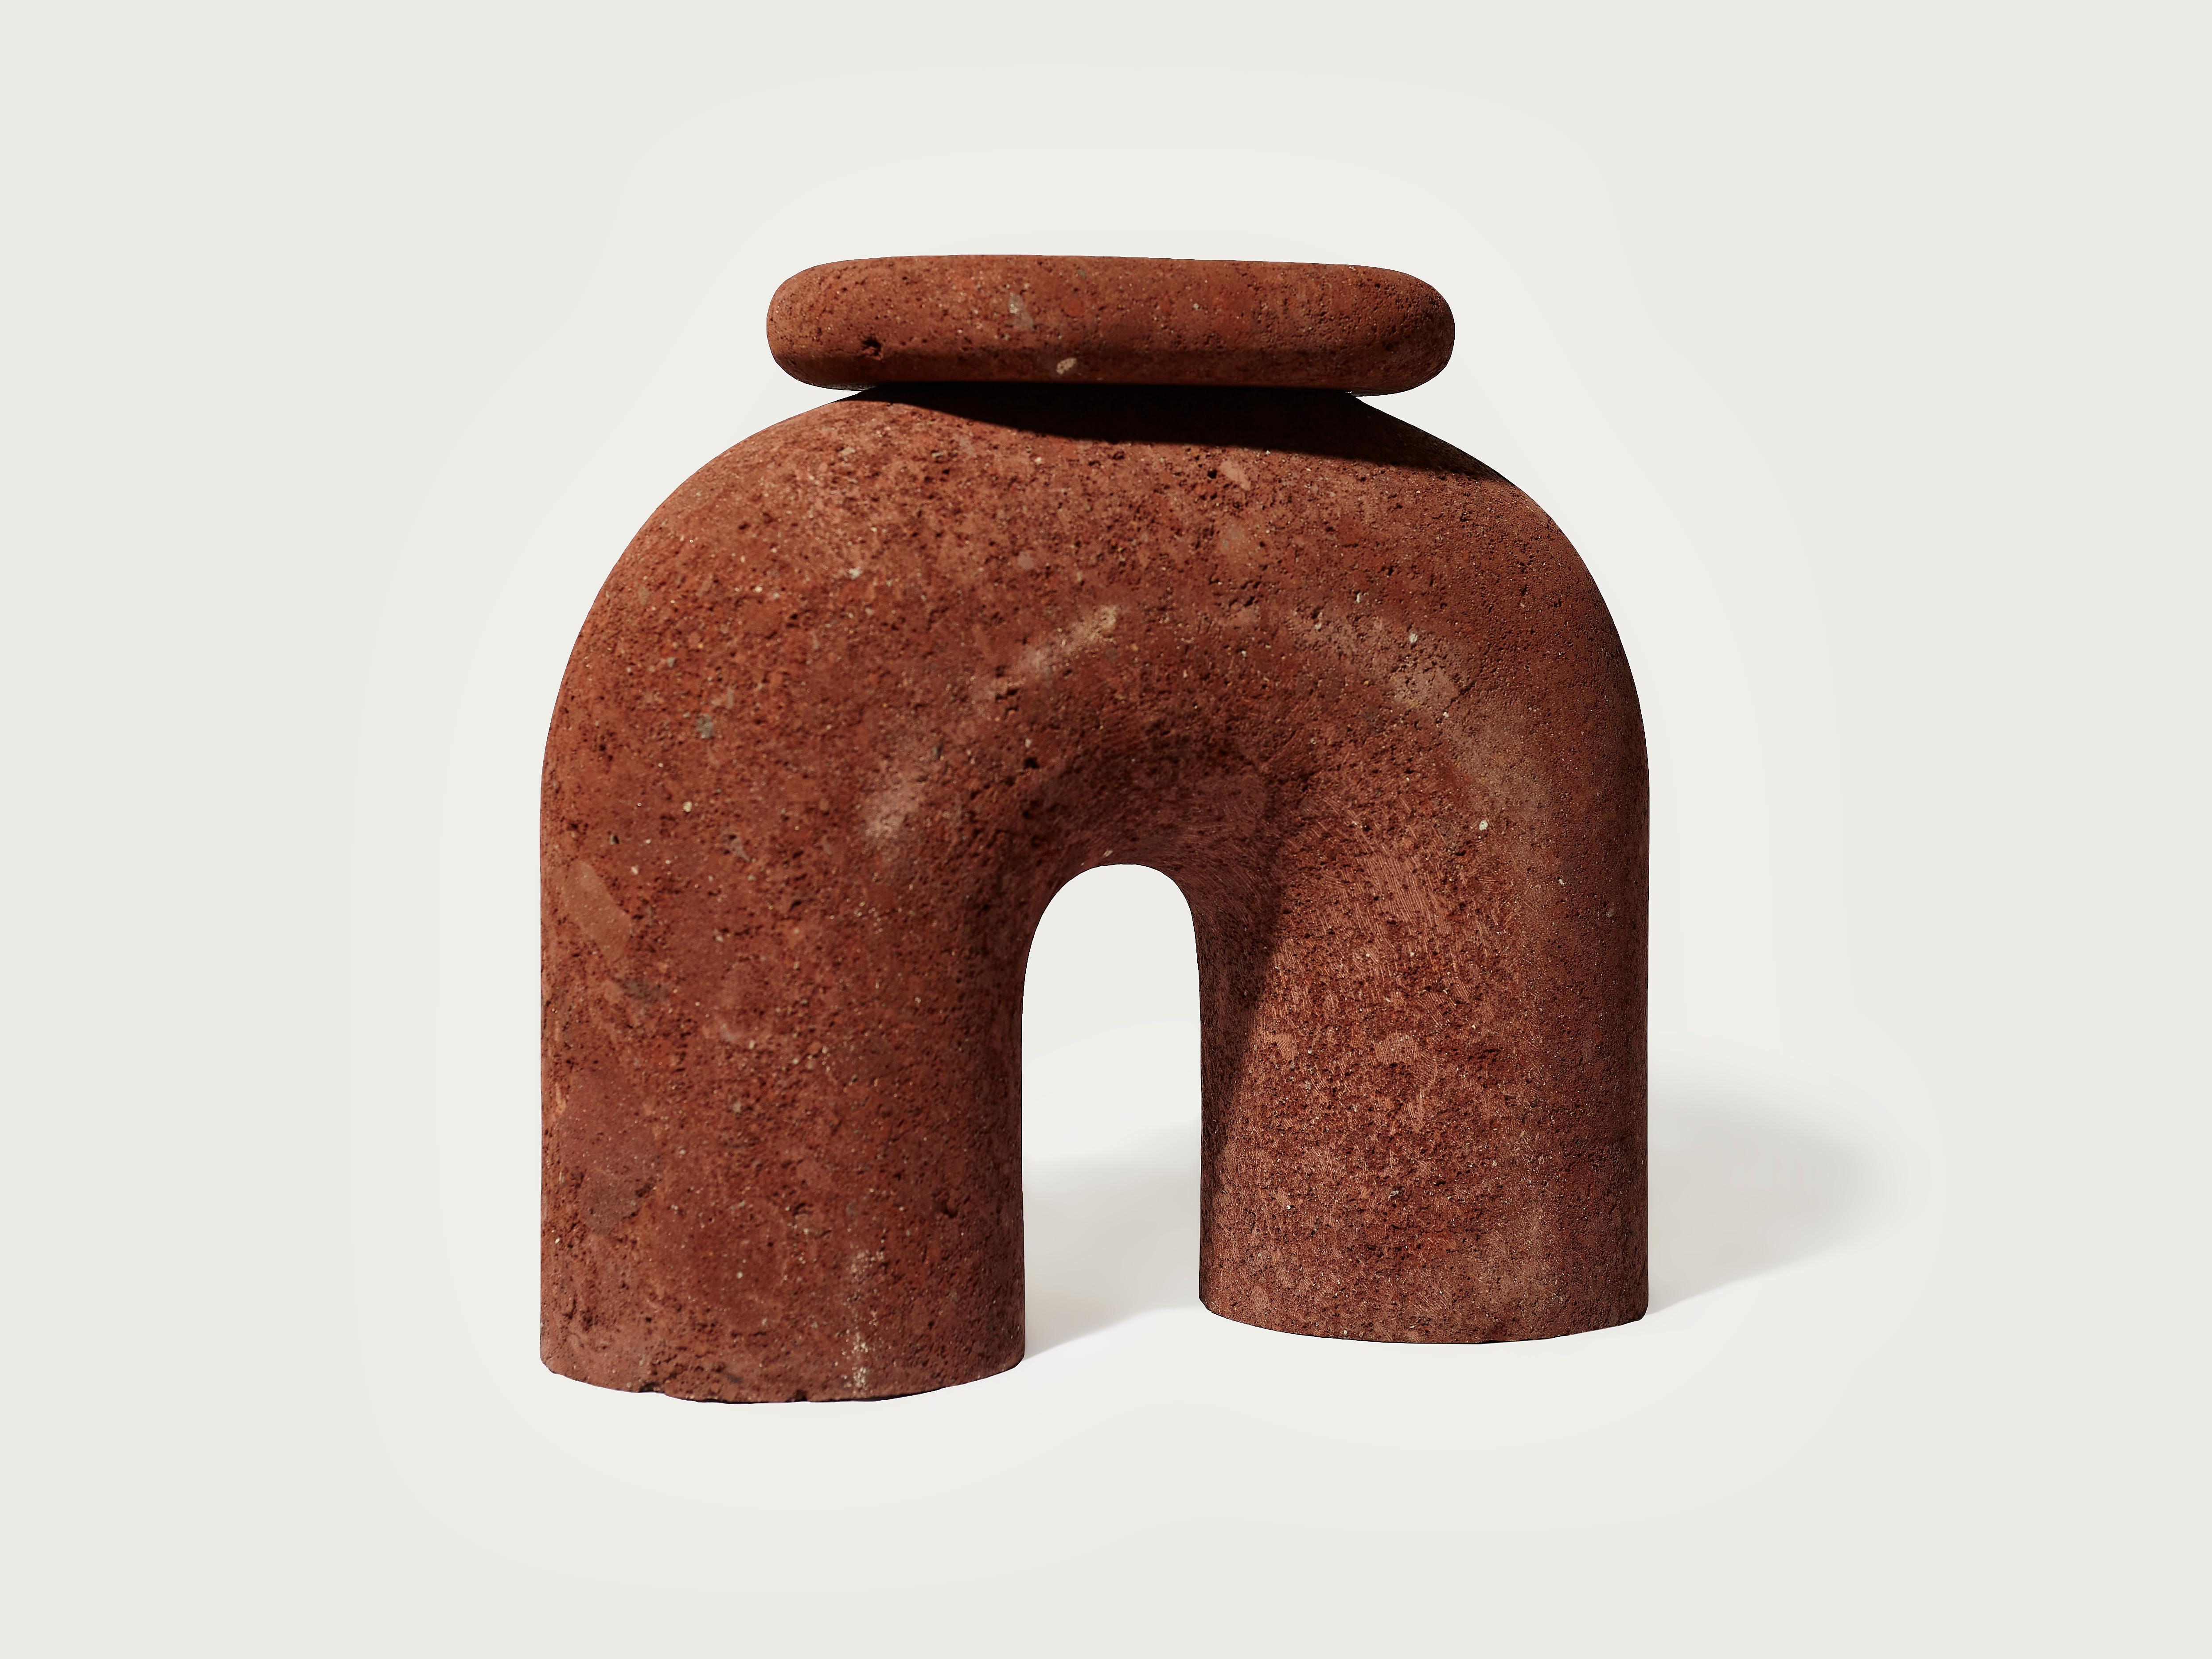 Neolithic thinker stool by Panorammma
Materials: tezontle (red volcanic rock). 
Dimensions: 45 x 50 x 20 cm.

Panorammma is a furniture design atelier based in Mexico City that seeks to redefine our relation to functional objects through